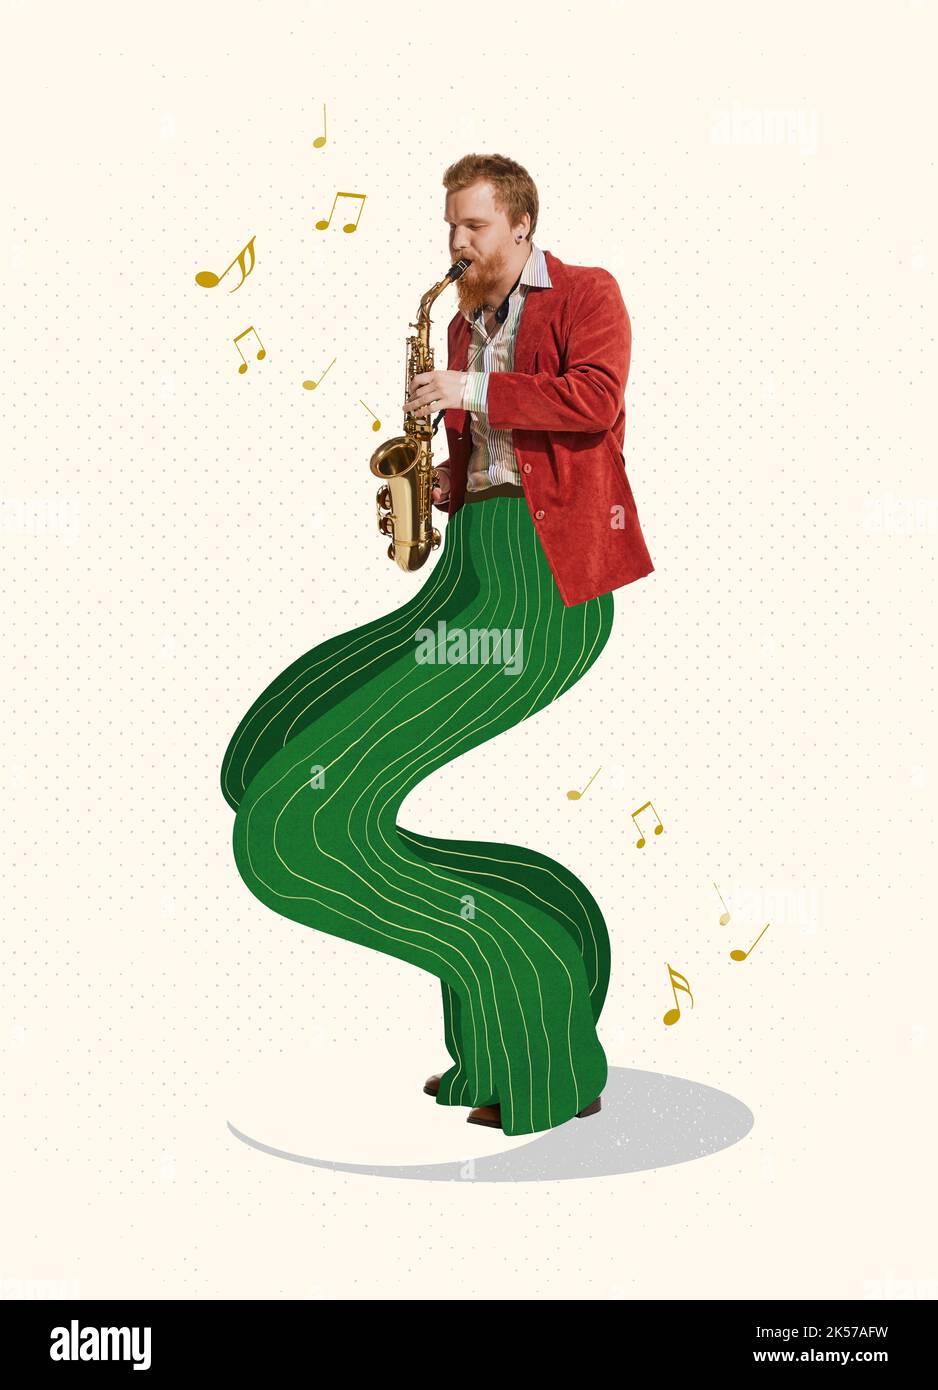 Contemporary art collage. Creative design with stylish man making performance, playing saxophone. Jazz concert Stock Photo